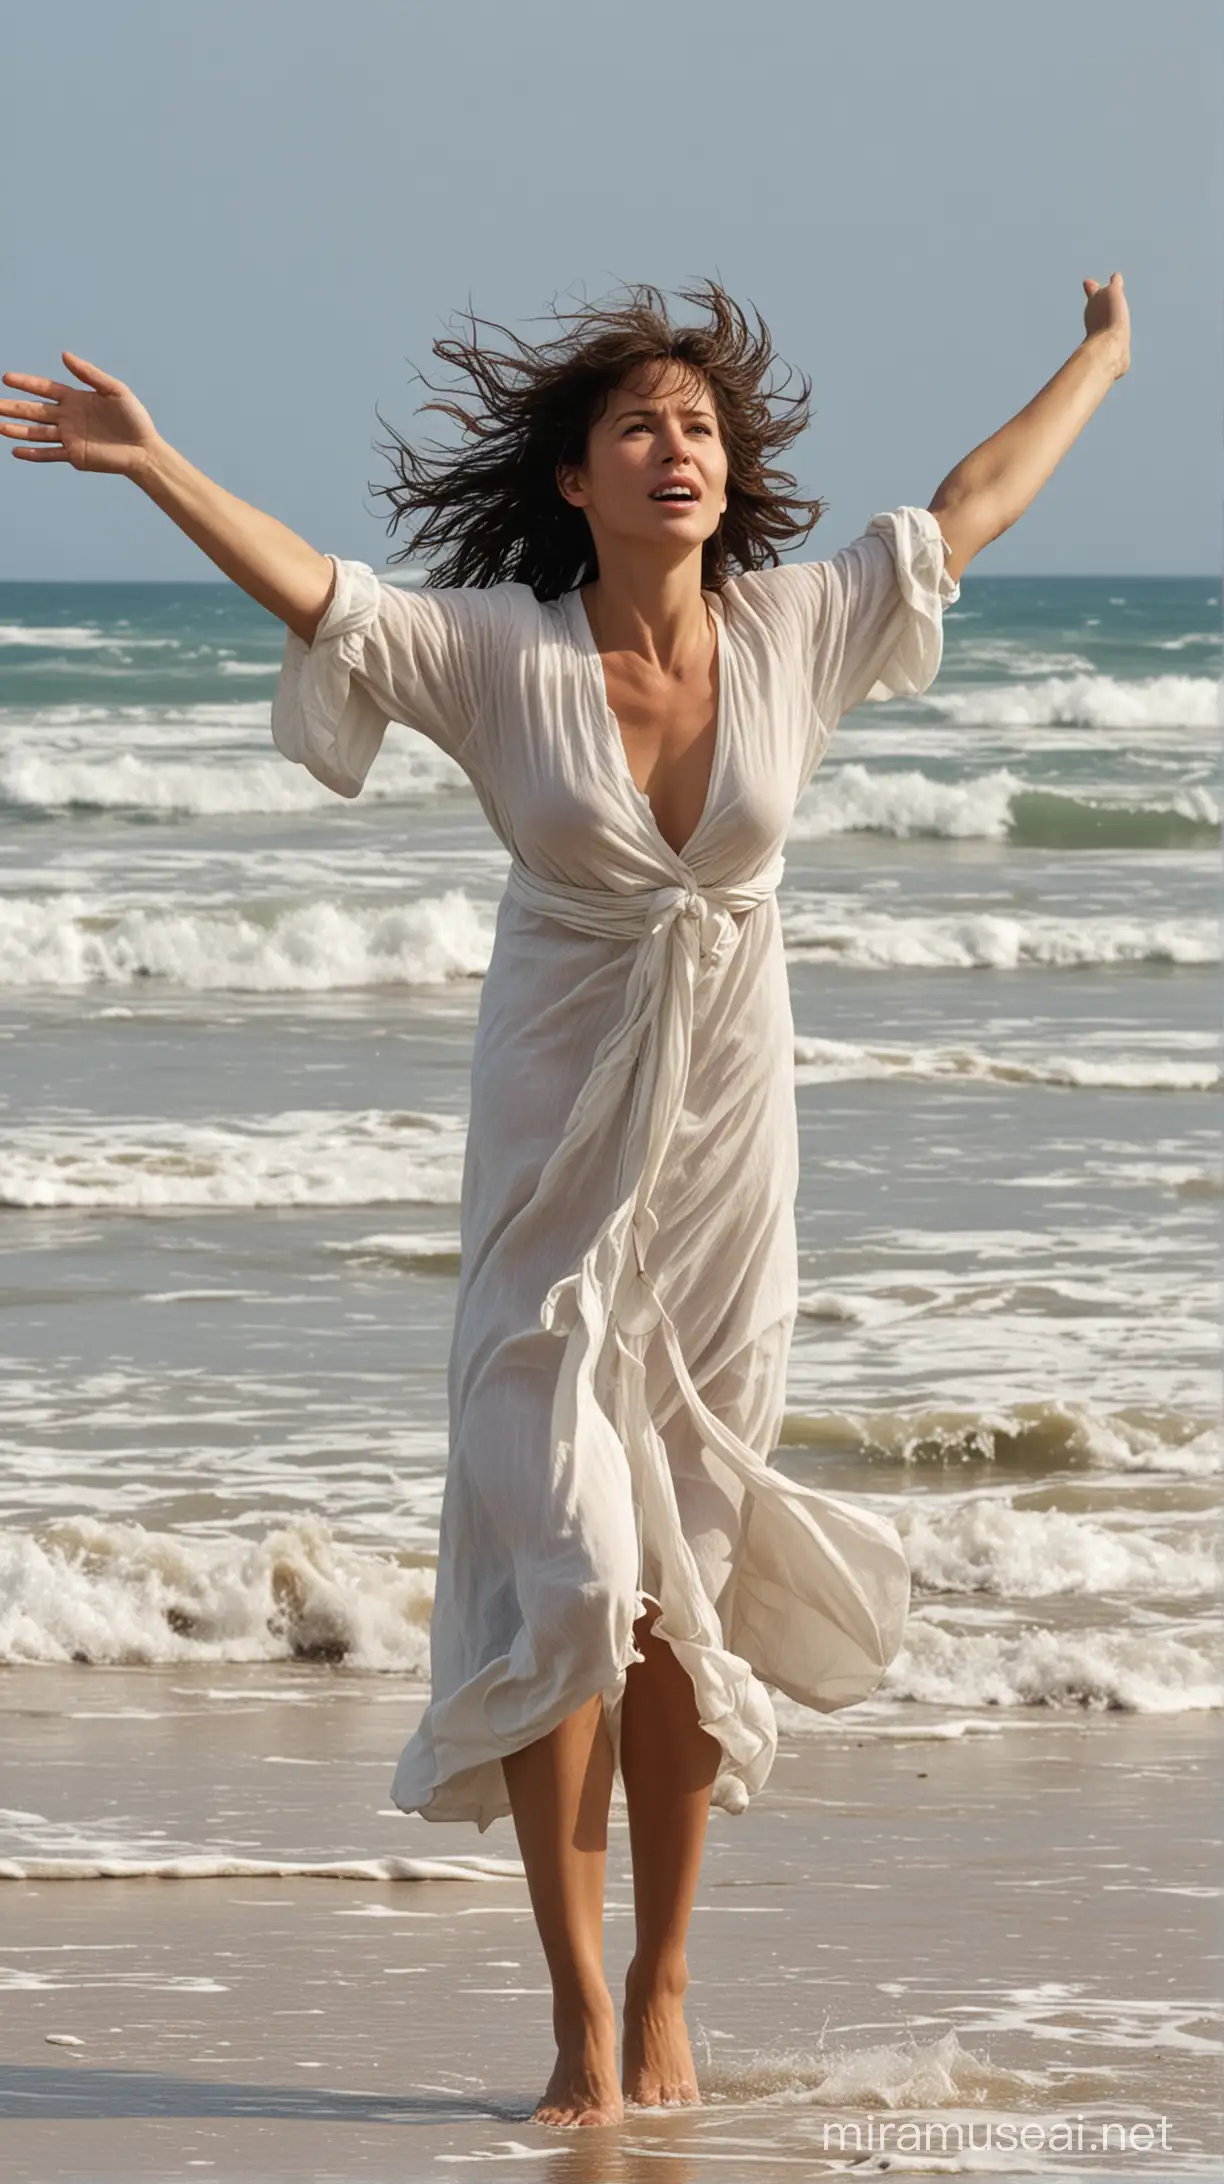 A defiant Sophie Marceau stands on a windswept beach, arms outstretched, hair whipping in the wind. The vastness of the ocean stretches out before her.